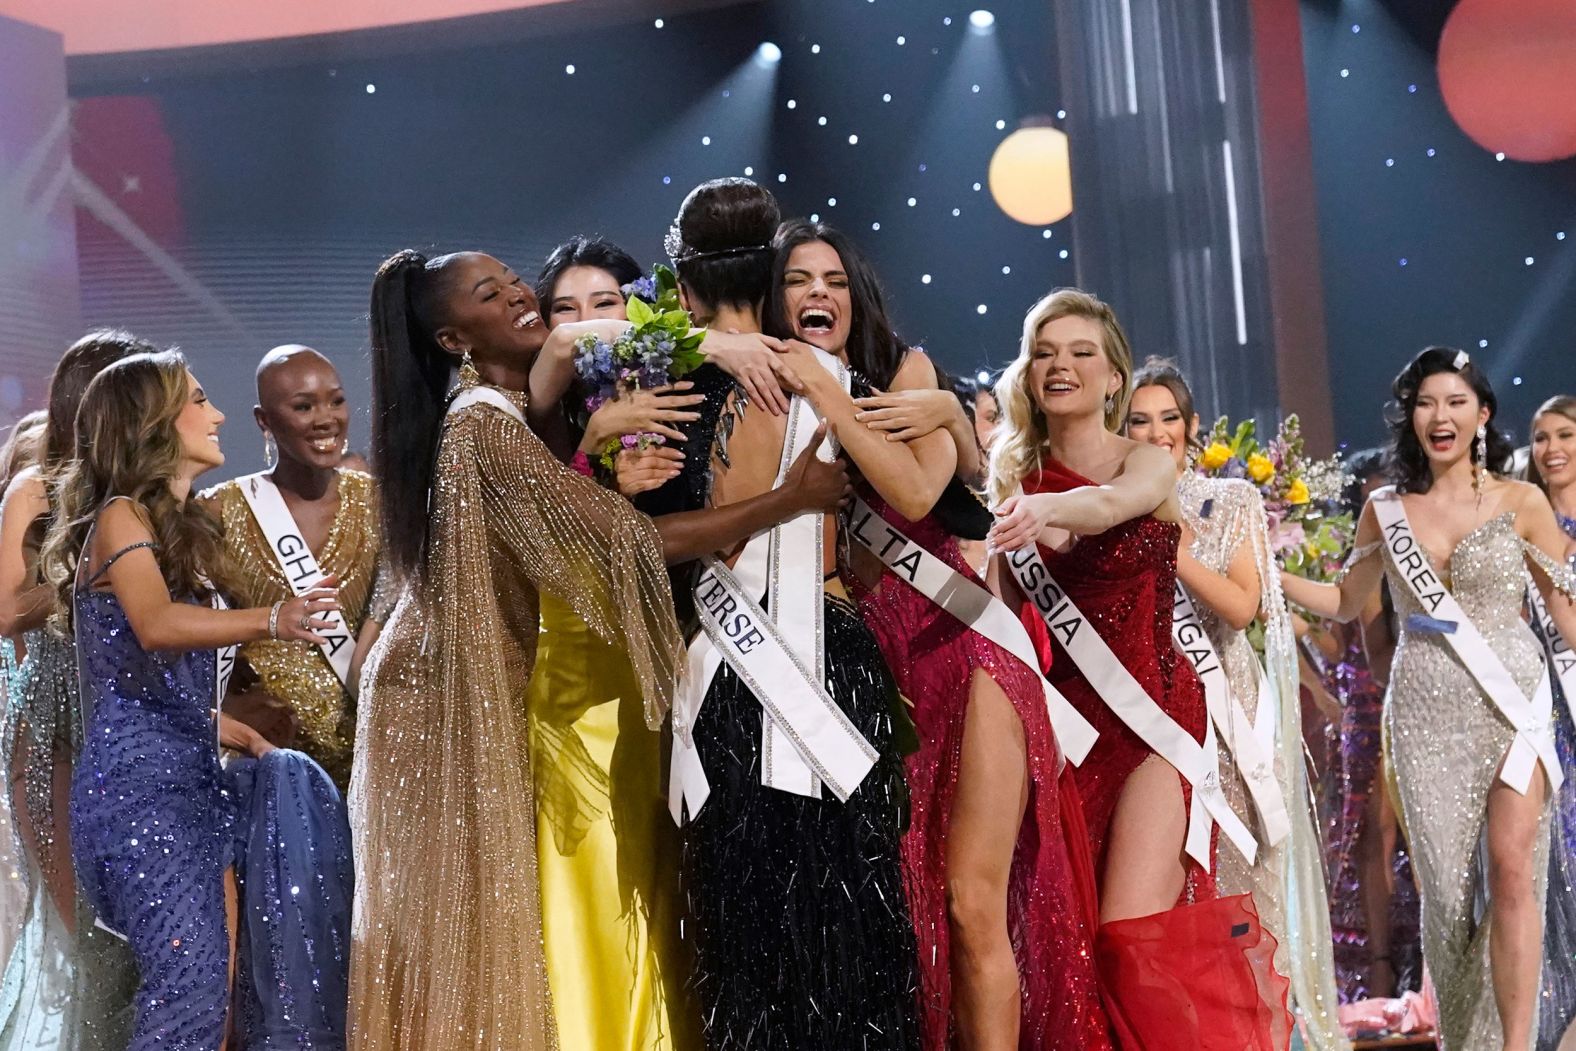 R'Bonney Gabriel of the United States is hugged by other contestants after being <a href="index.php?page=&url=https%3A%2F%2Fwww.cnn.com%2Fstyle%2Farticle%2Fmiss-universe-crowned-rbonney-gabriel-usa-intl-hnk%2Findex.html" target="_blank">crowned Miss Universe</a> in New Orleans on Saturday, January 14. Gabriel, who last year became the first Filipino-American to win Miss USA, took the crown ahead of Amanda Dudamel from Venezuela and Andreína Martínez from the Dominican Republic.